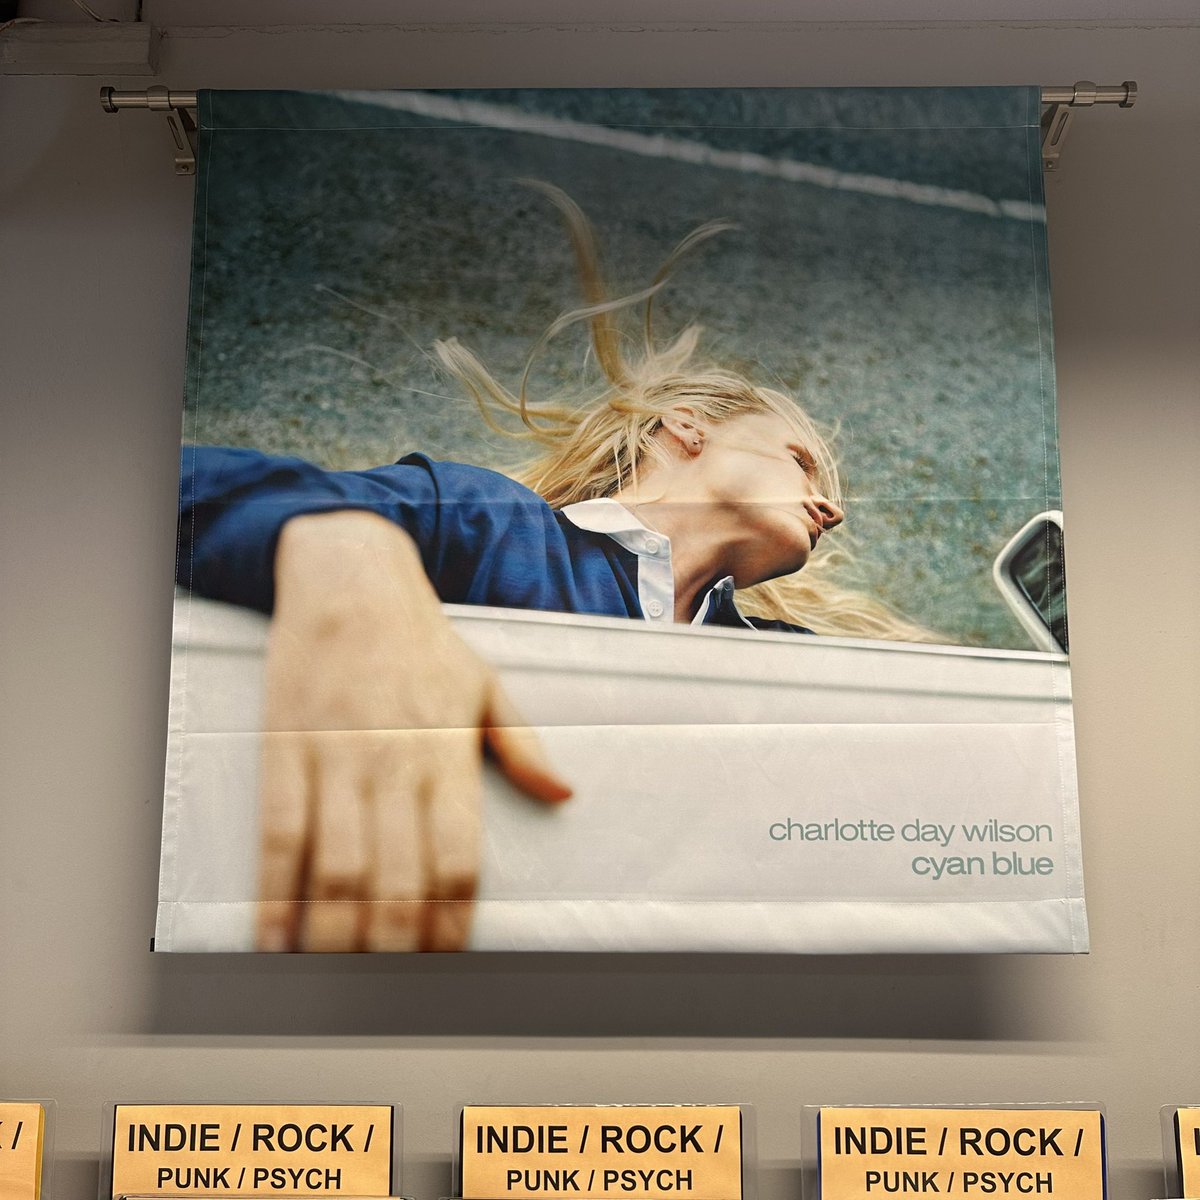 BRAND NEW BANNER Charlotte Day Wilson - ‘Cyan Blue’ piccadillyrecords.com/counter/search…) @chardaywilson @XLRECORDINGS